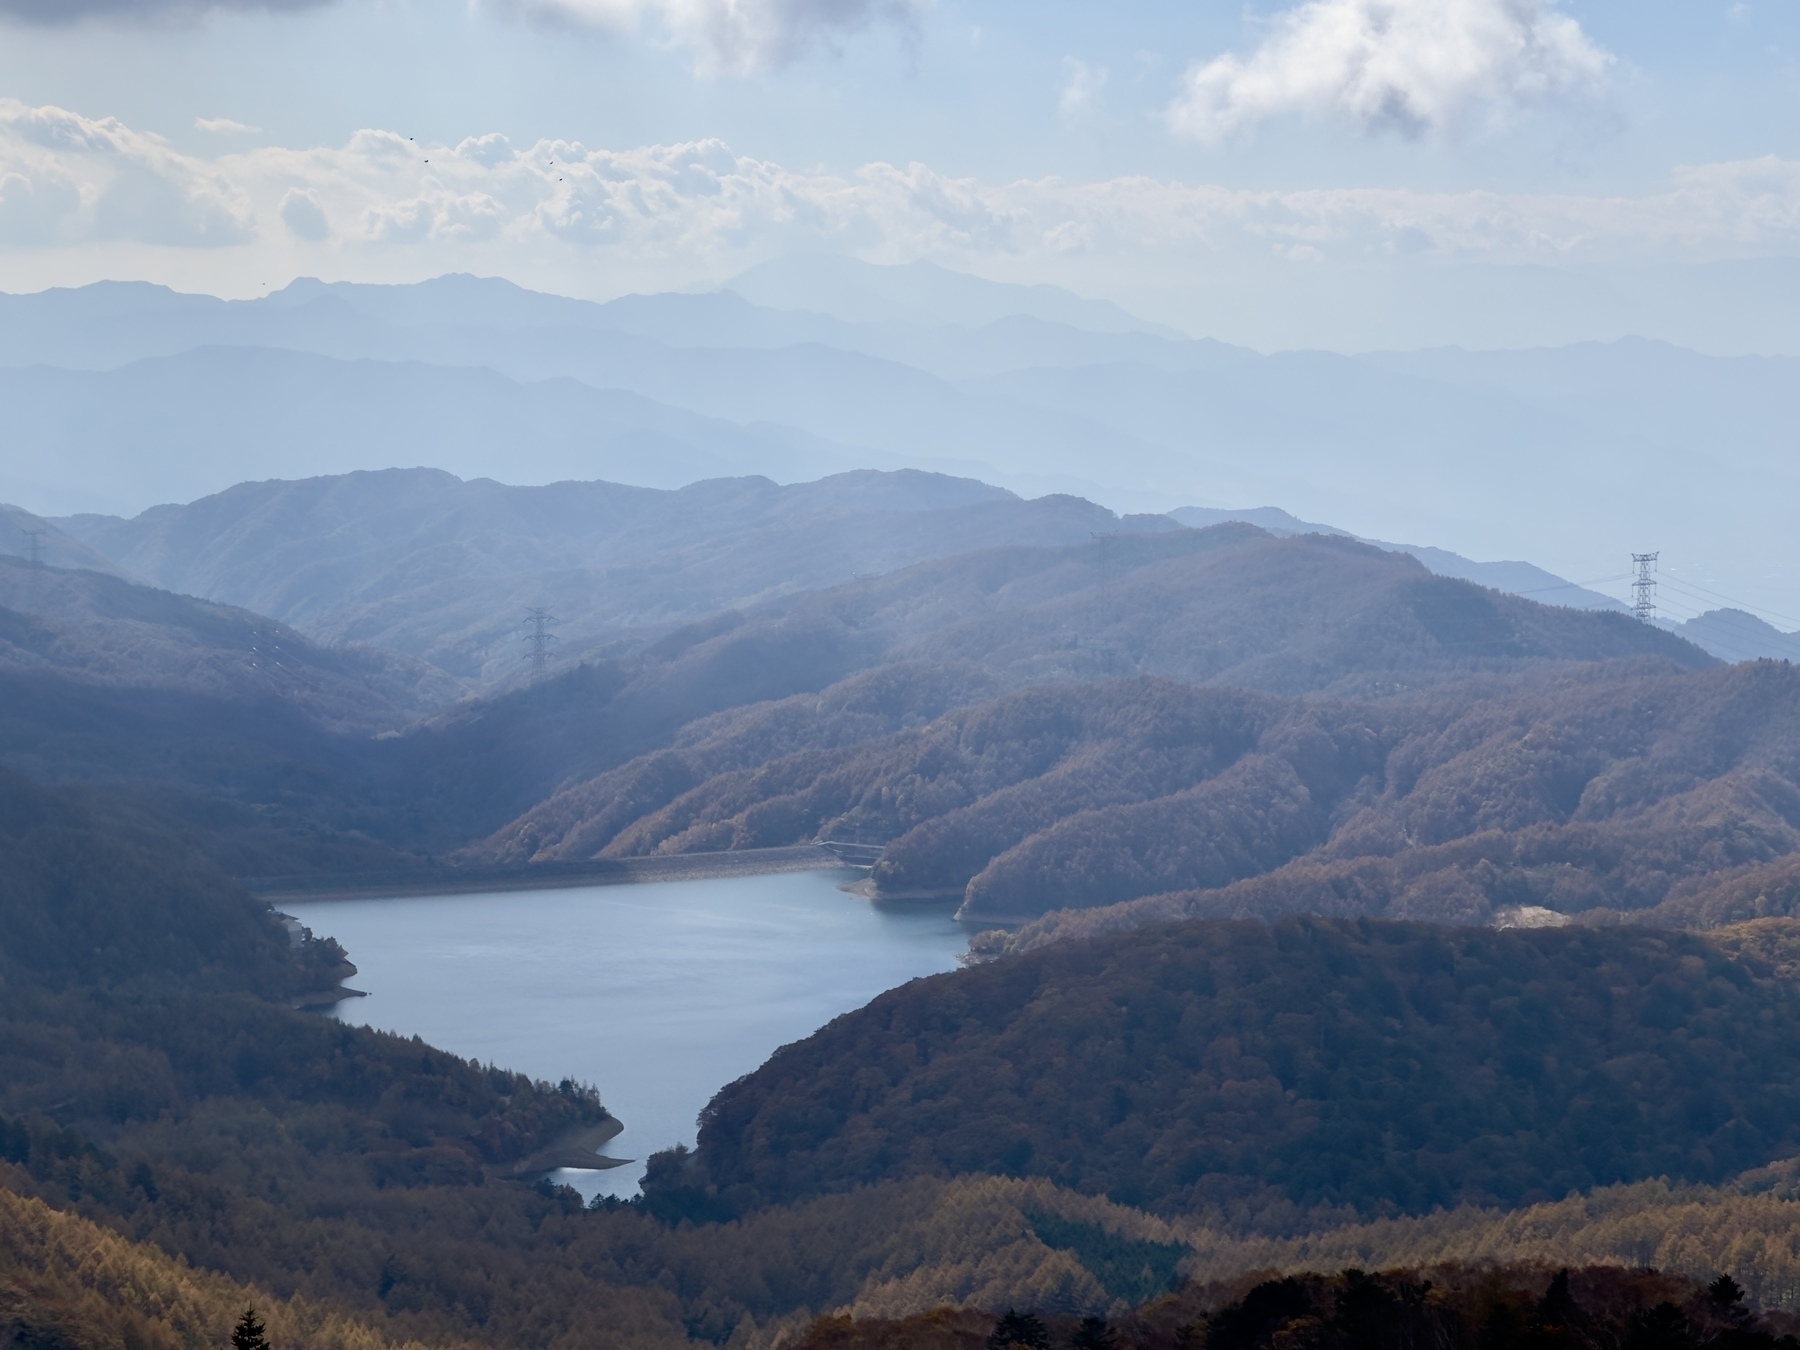 View of lake Daibosatsu in Yamanashi Japan, from route down from the summit.